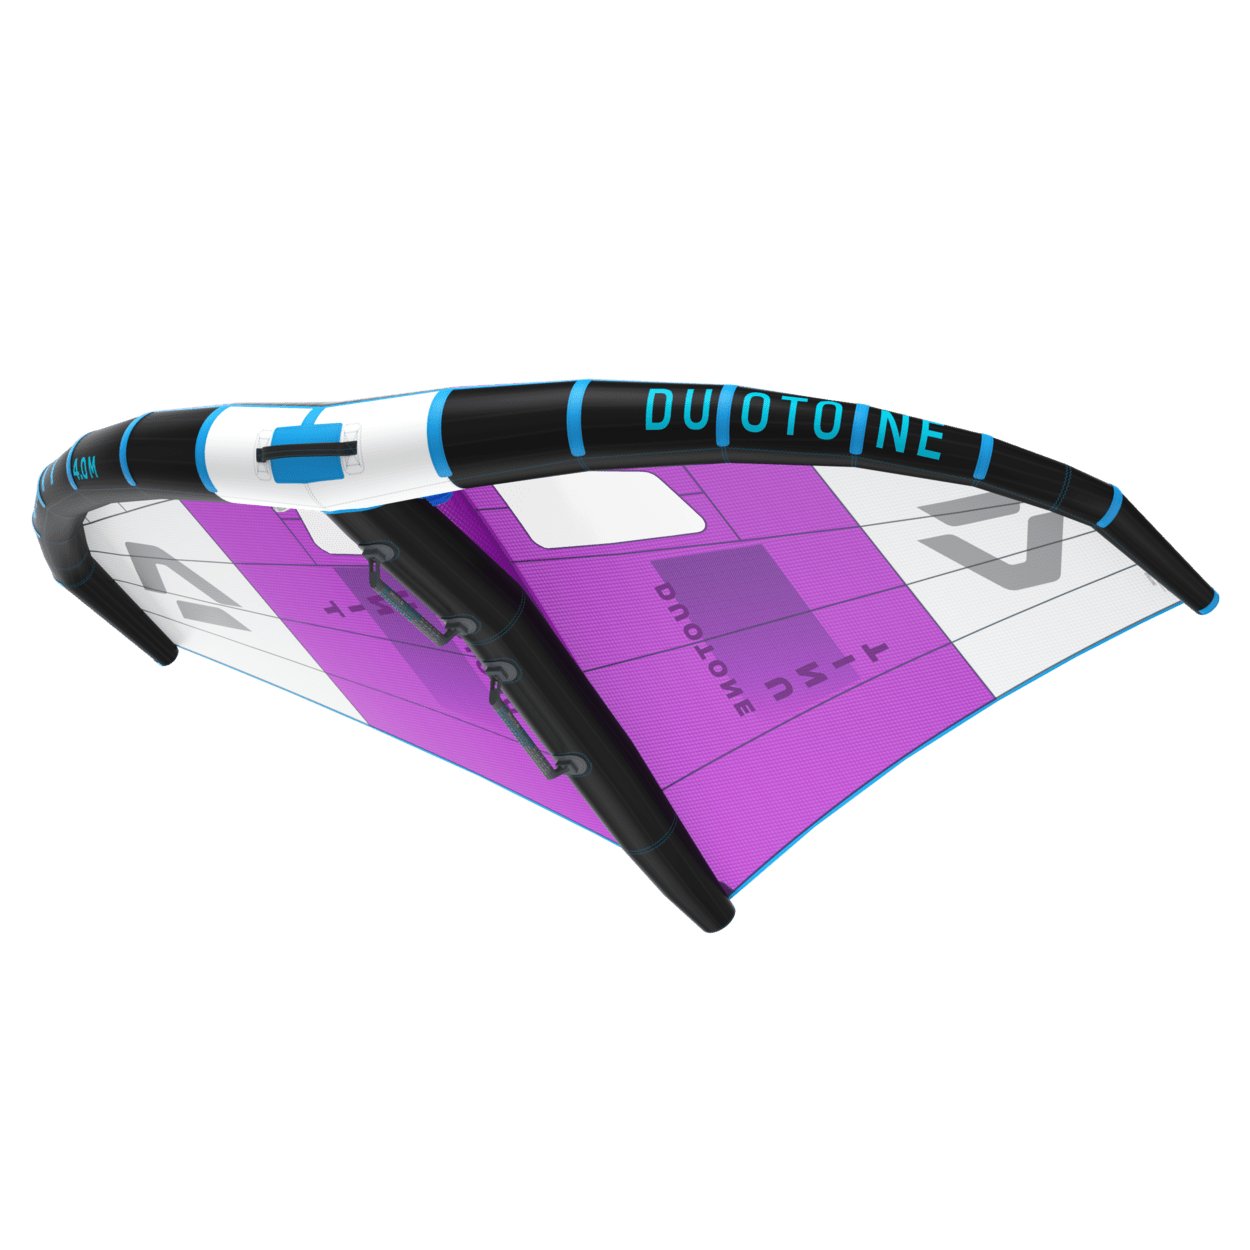 Duotone Foil Wing Unit 2022 - Worthing Watersports - 9010583075075 - Foilwing - Duotone X